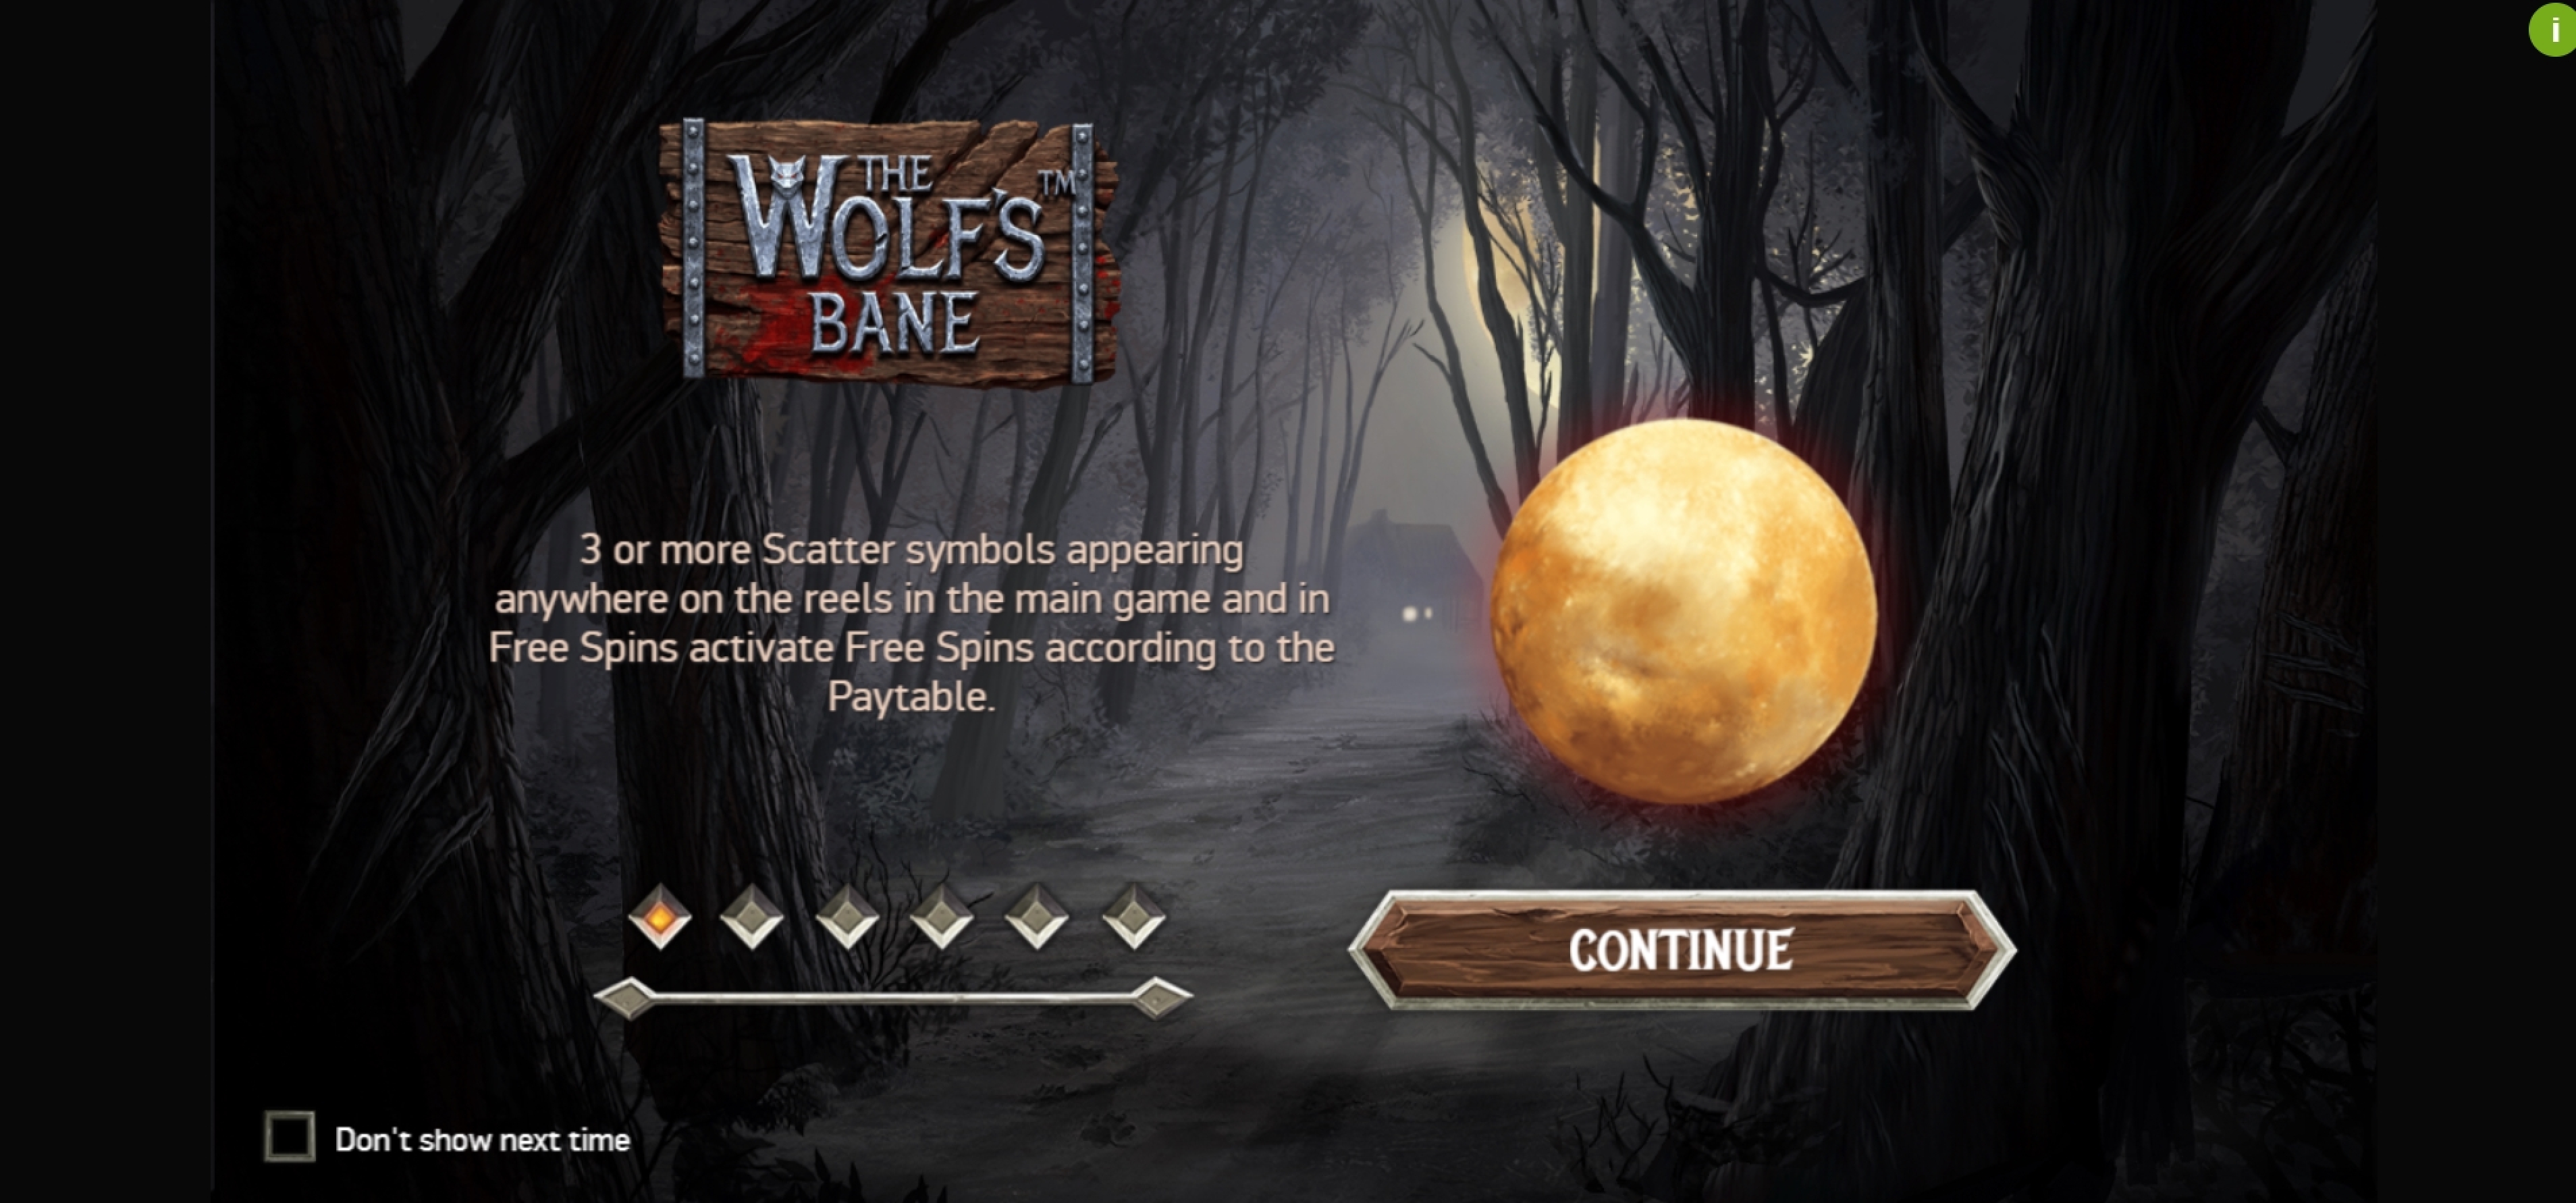 Play The Wolf's Bane Free Casino Slot Game by NetEnt